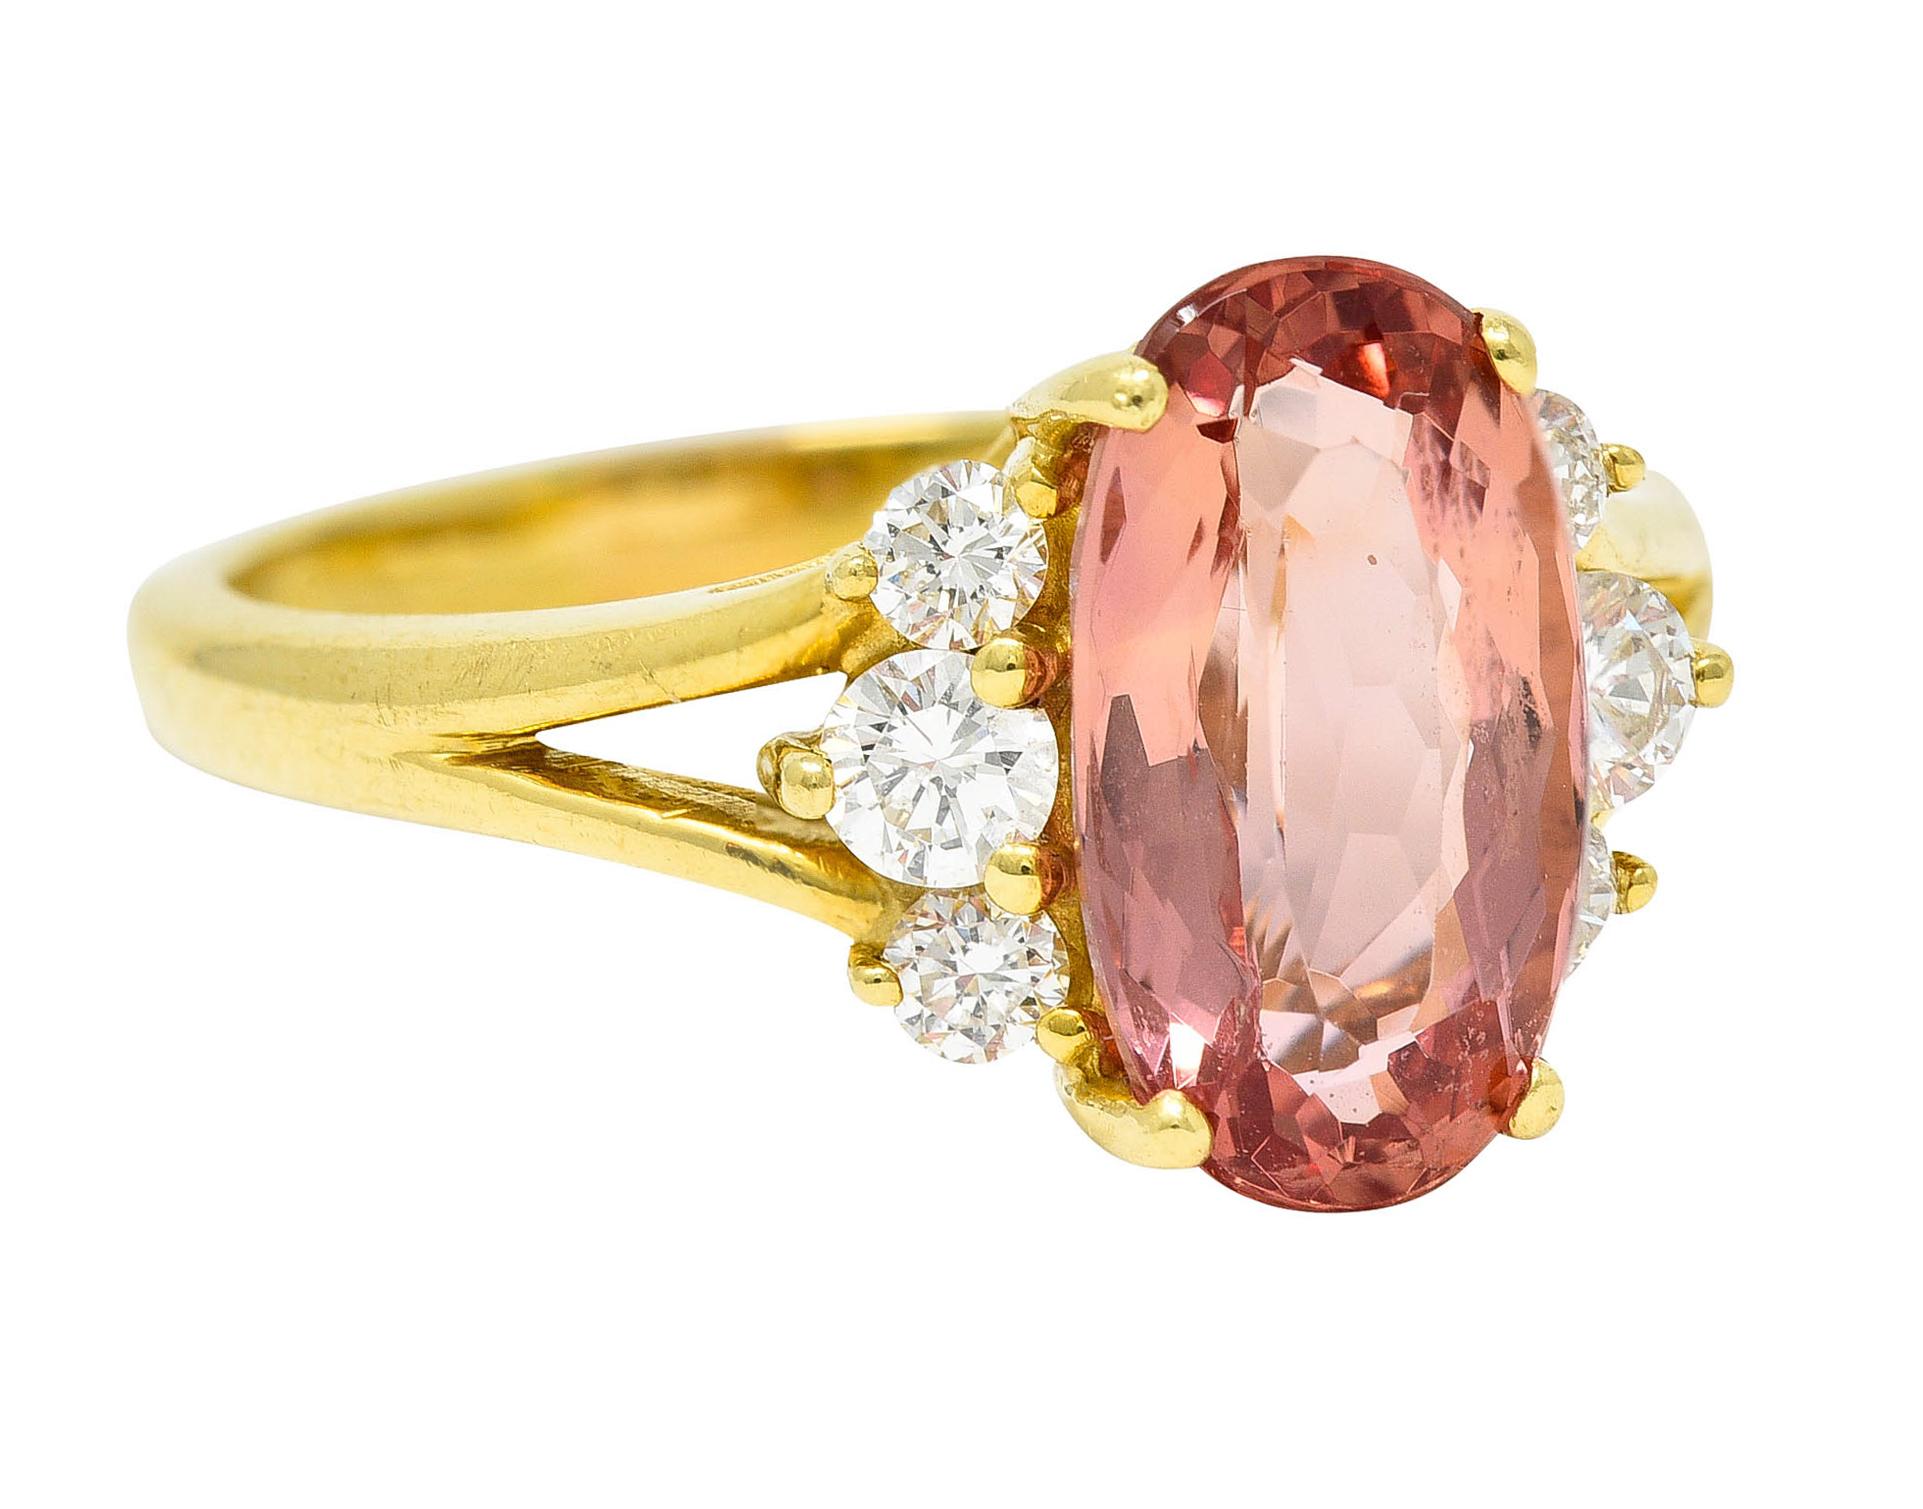 Featuring an oval mixed cut imperial topaz weighing approximately 2.65 carats

Transparent with pinkish peach color with strong saturation North and South

Basket set and flanked by round brilliant cut diamonds

Weighing in total approximately 0.30